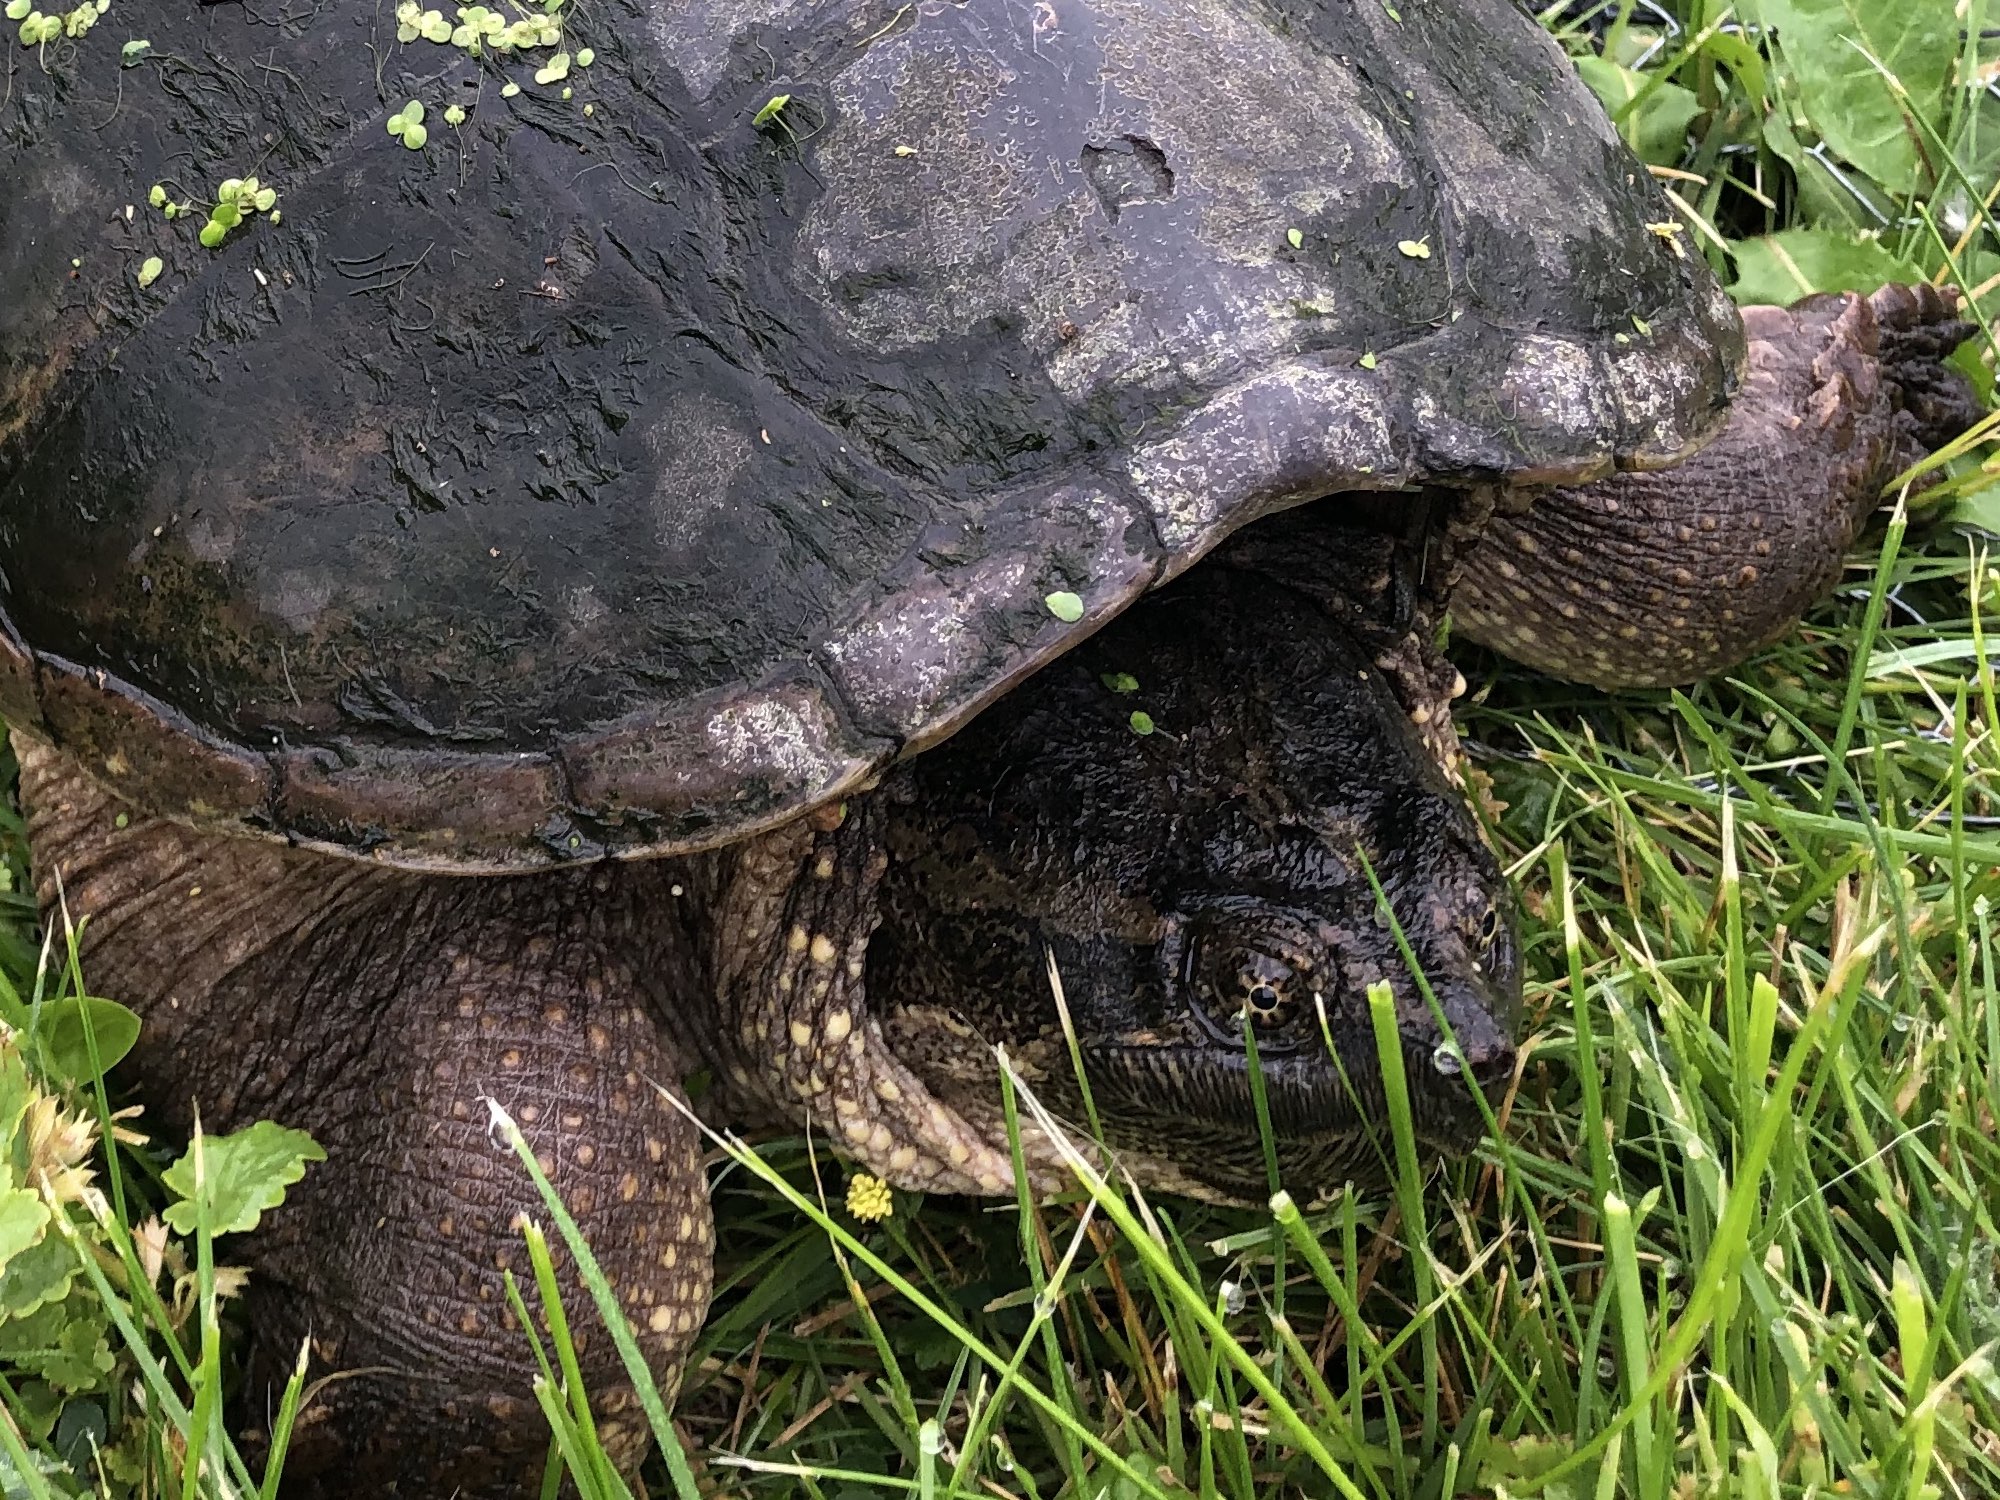 Snapping Turtle by Three Sisters Garden off of Monroe Street in Madison, Wisconsin on June 18, 2019.